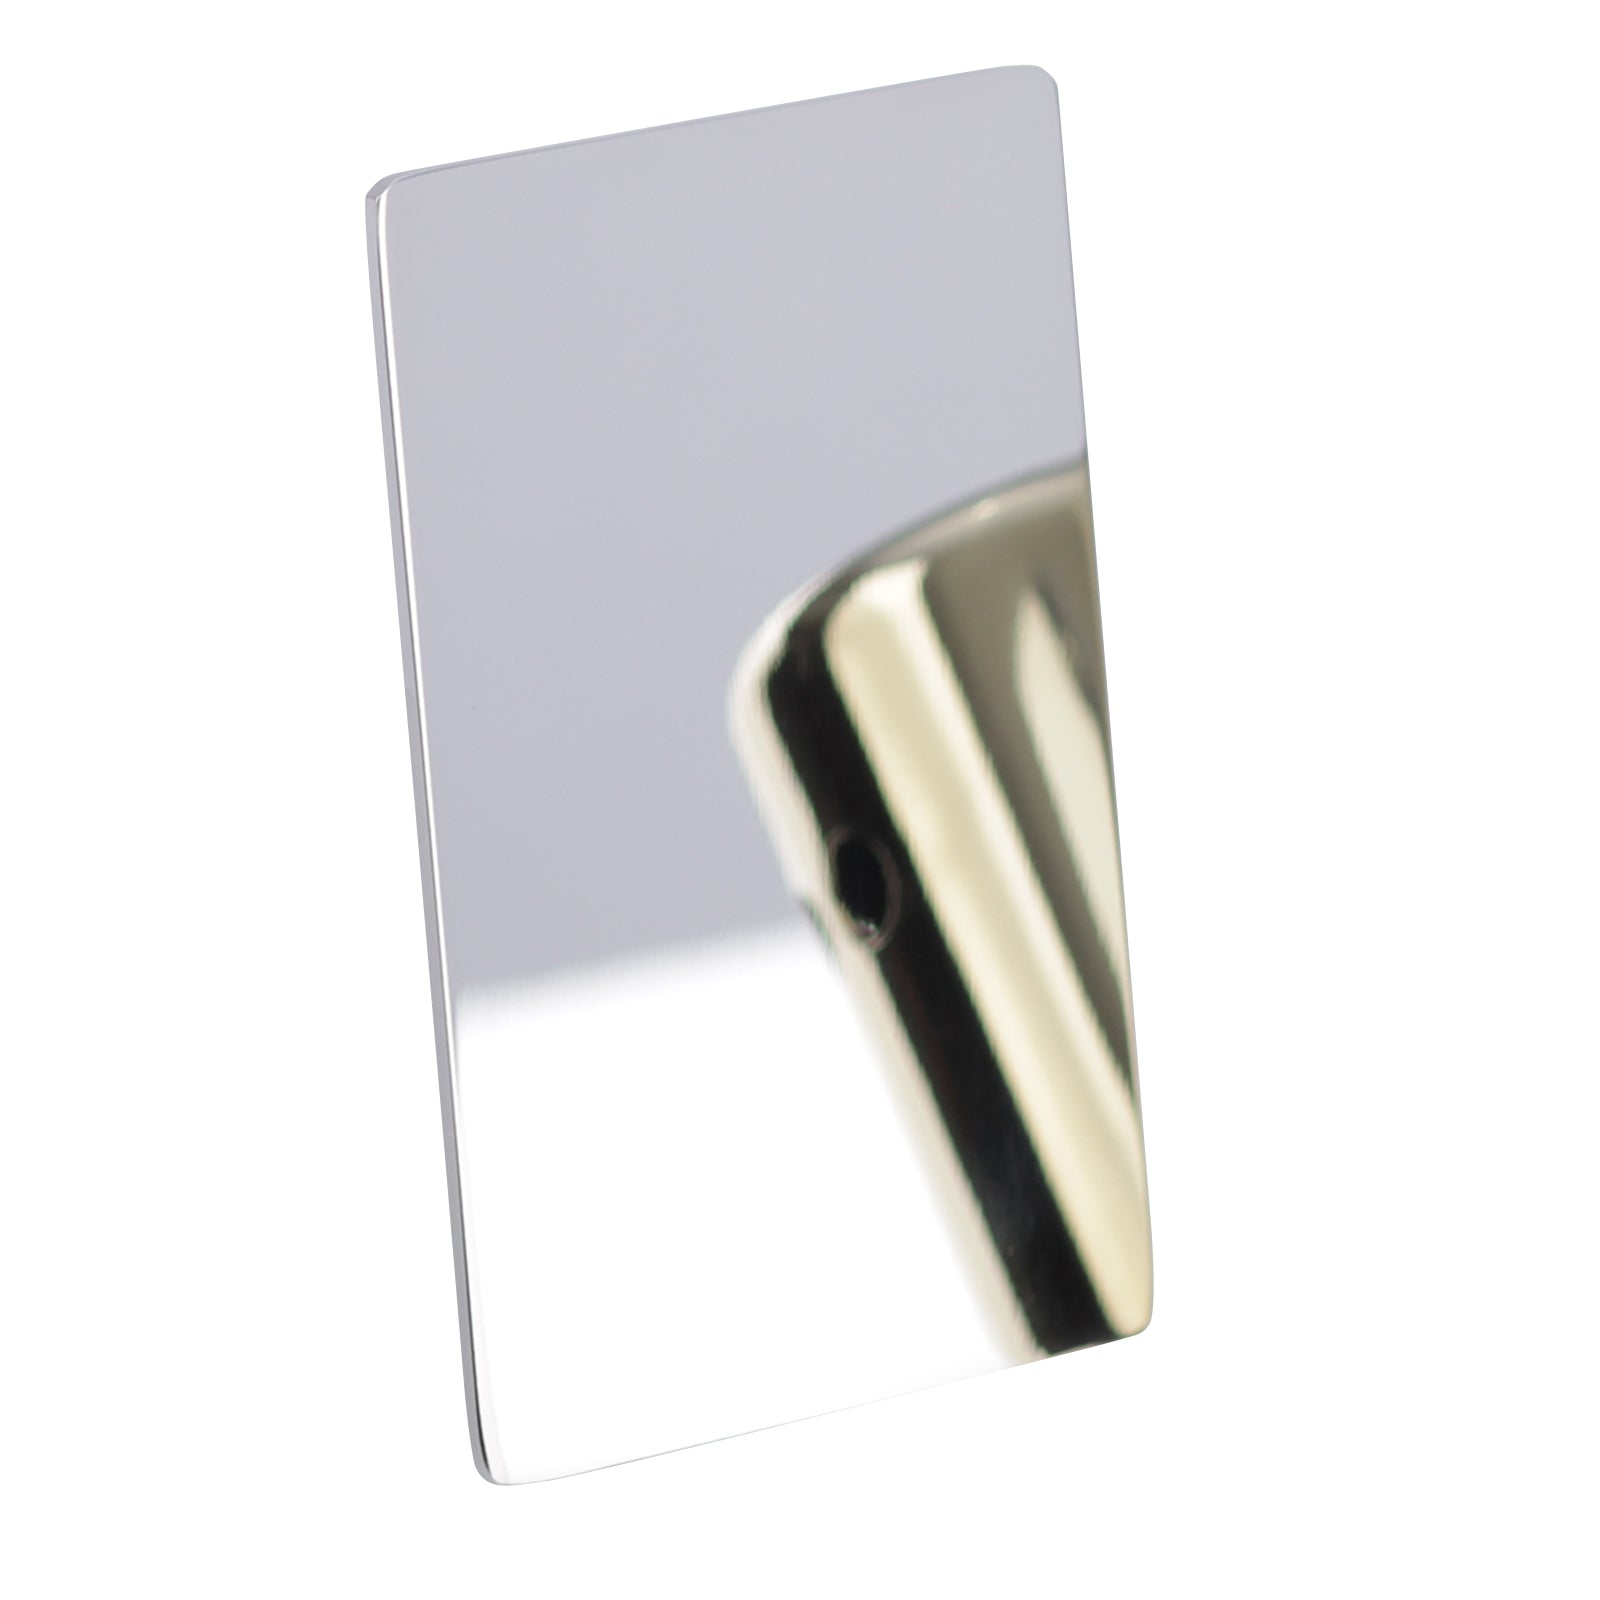 Akicon Polished Chrome Stainless Steel Sample